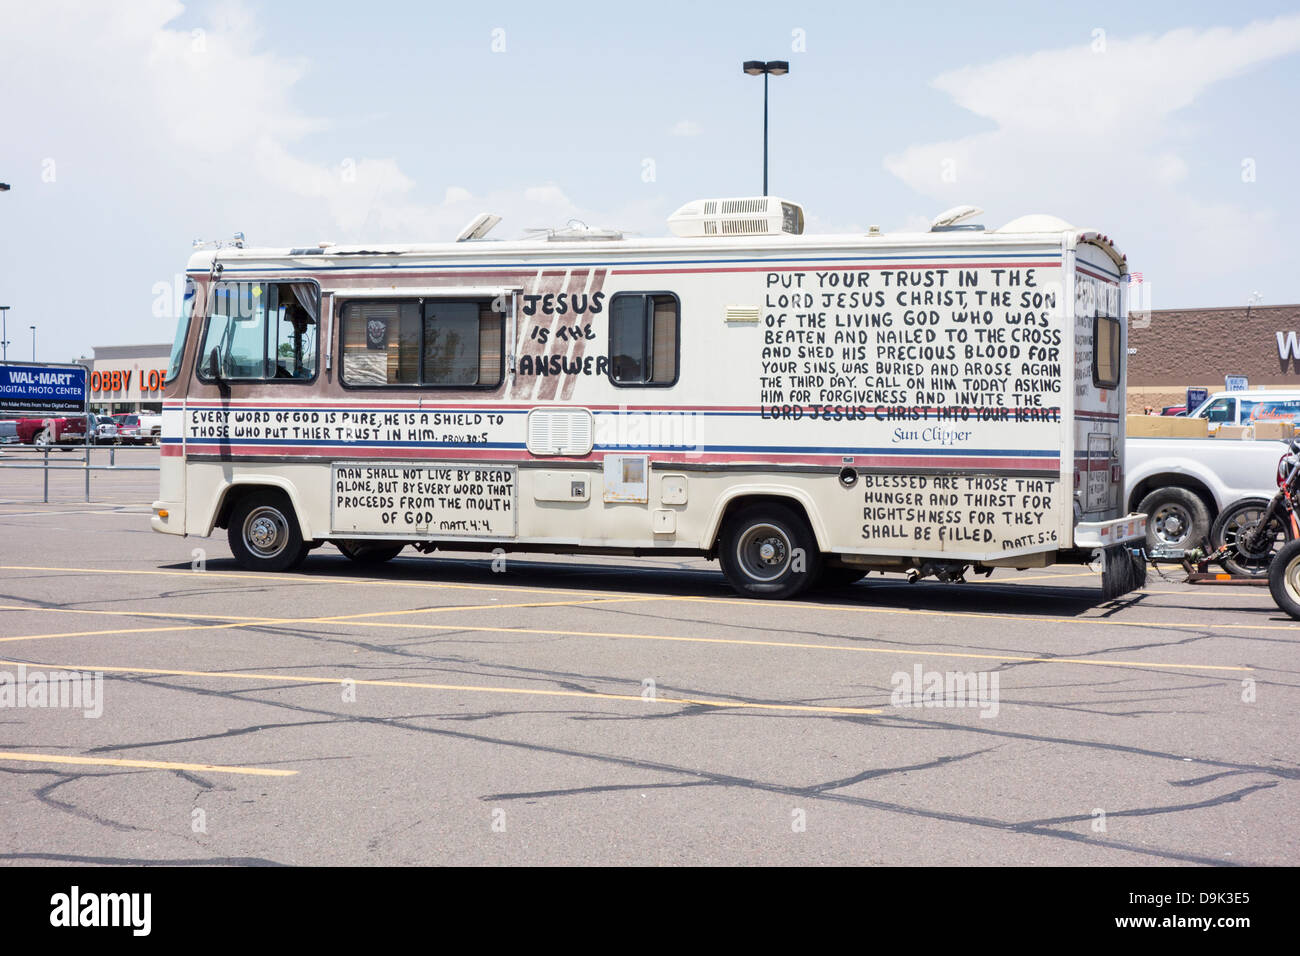 A recreational vehicle with biblical scripture painted all over it, along with solicitation for money. Walmart parking lot in Oklahoma City, OK, USA. Stock Photo